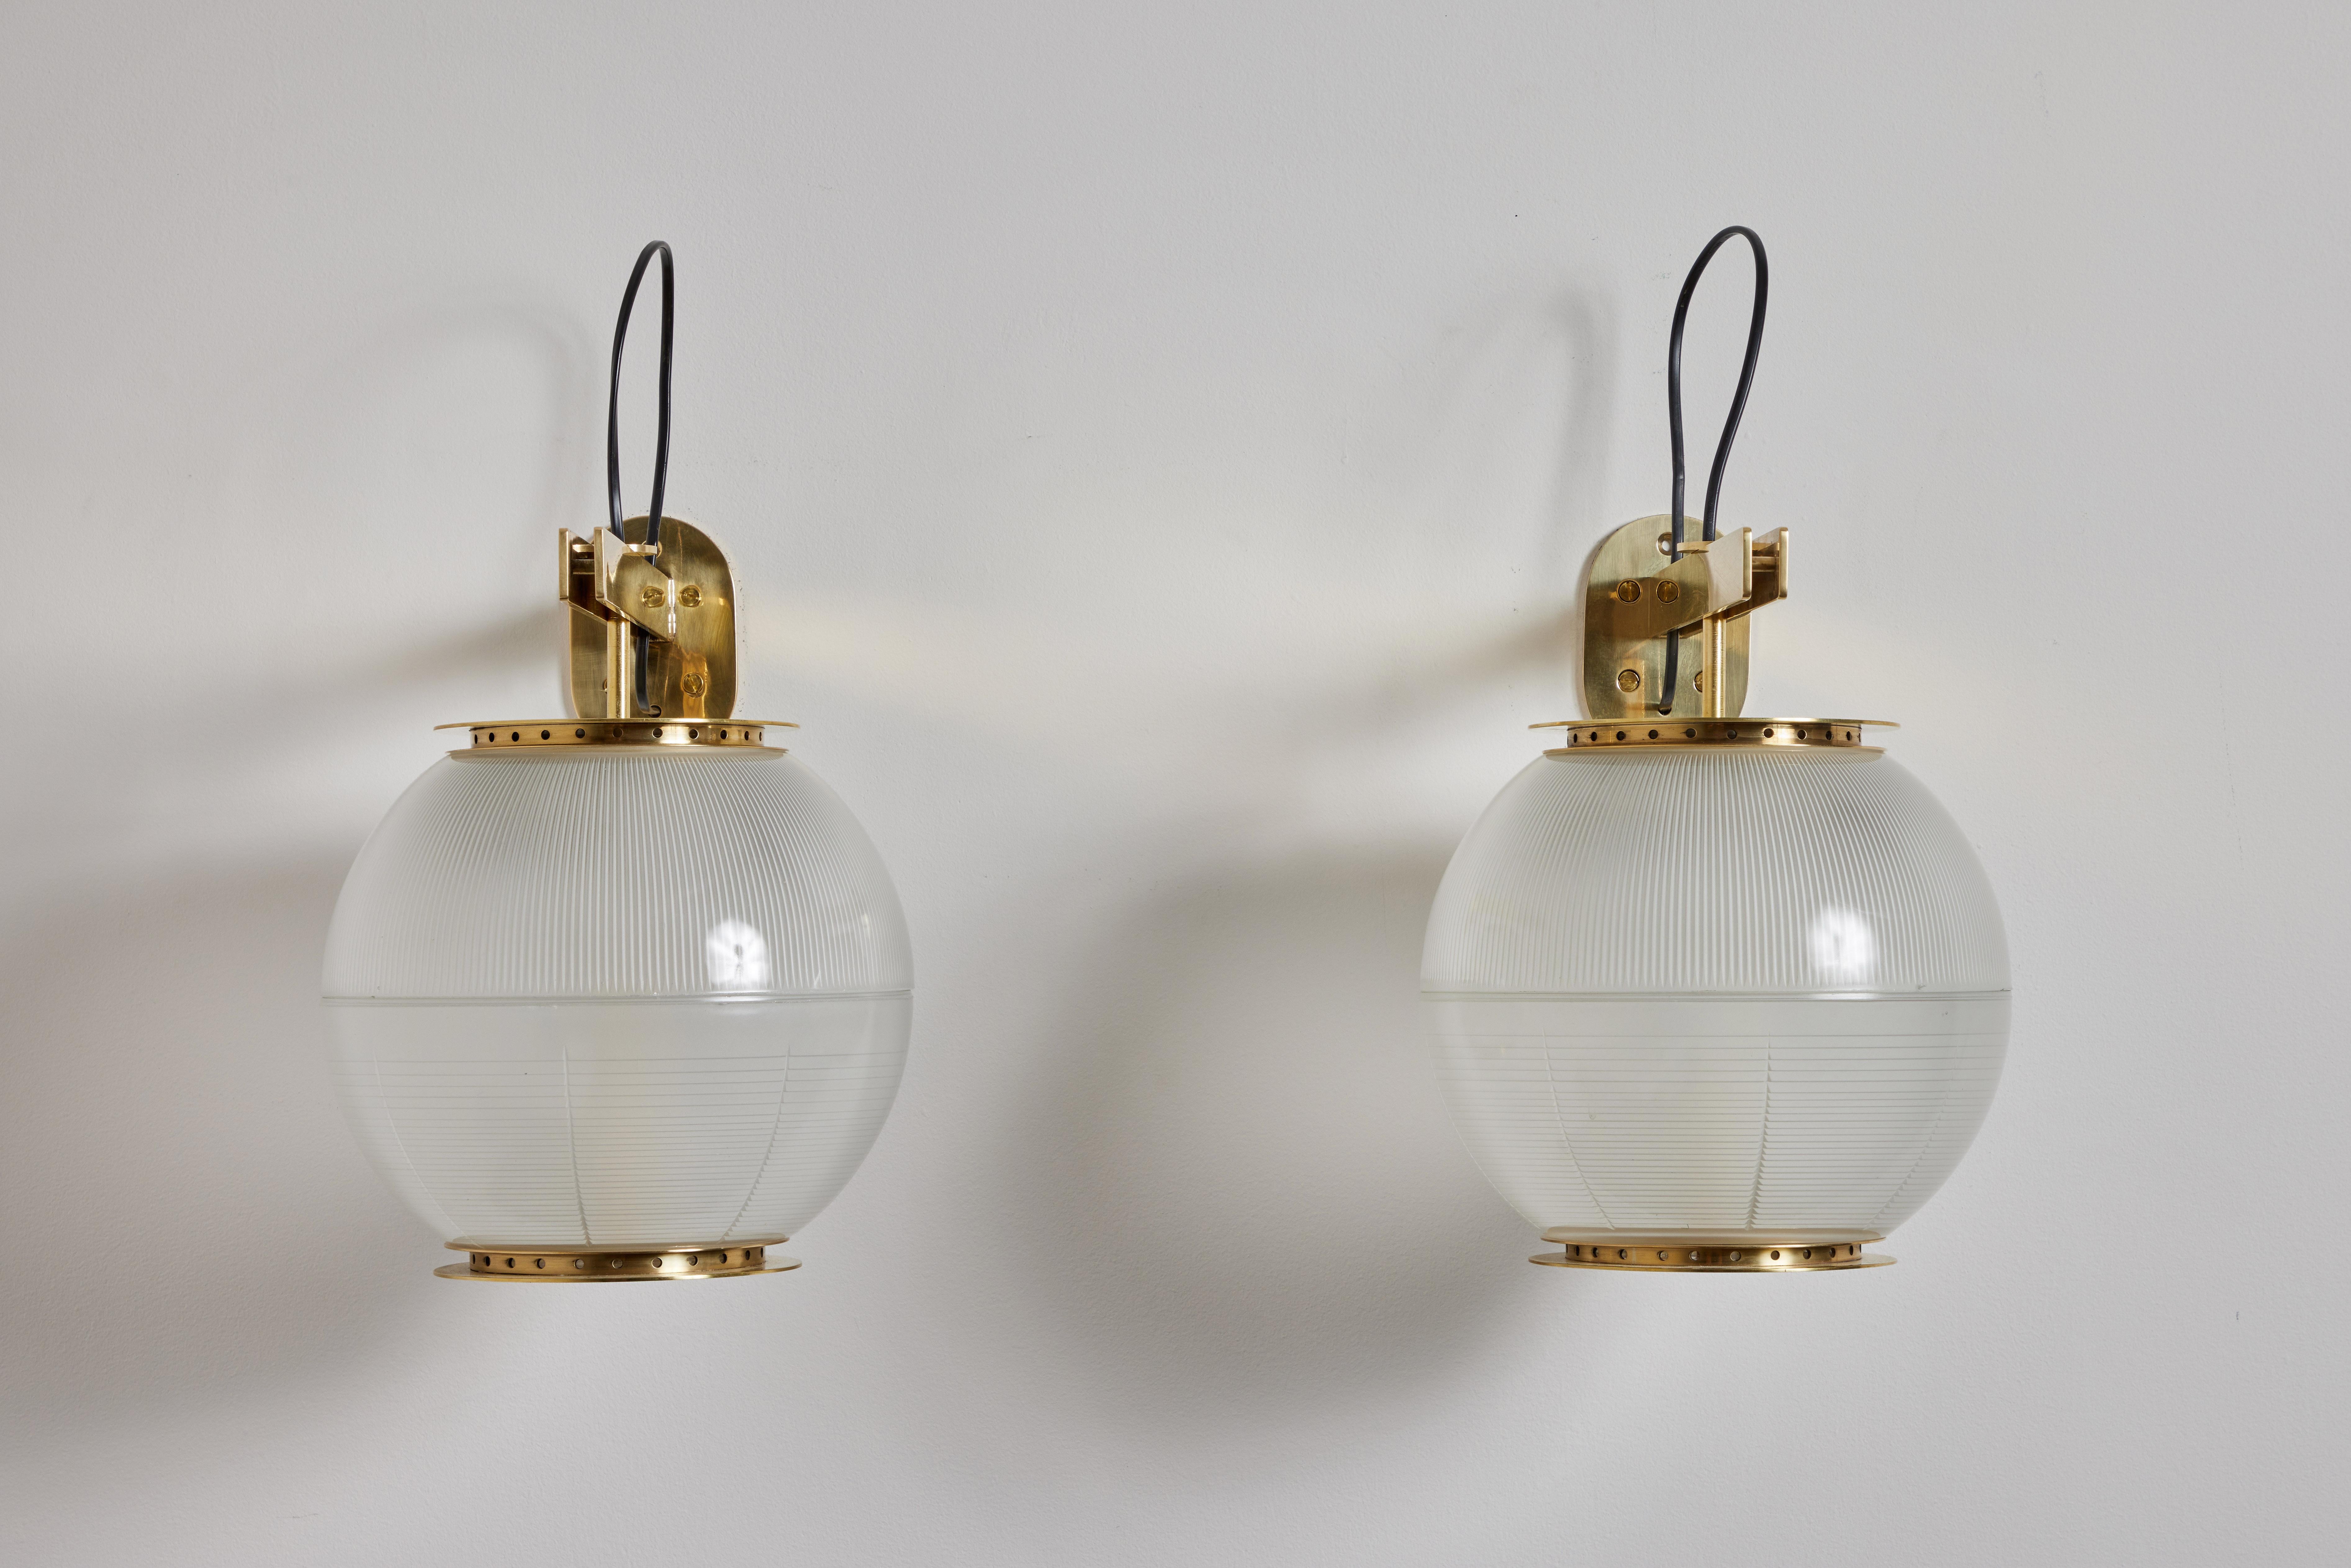 Pair of Model Lp7 sconces by Ignazio Gardella for Azucena. Designed and manufactured in Italy, circa 1950s. Brass and holophane glass. Rewired for U.S. standards. Original backplates. Retains original manufacturer's mark. We recommend three E27 60w